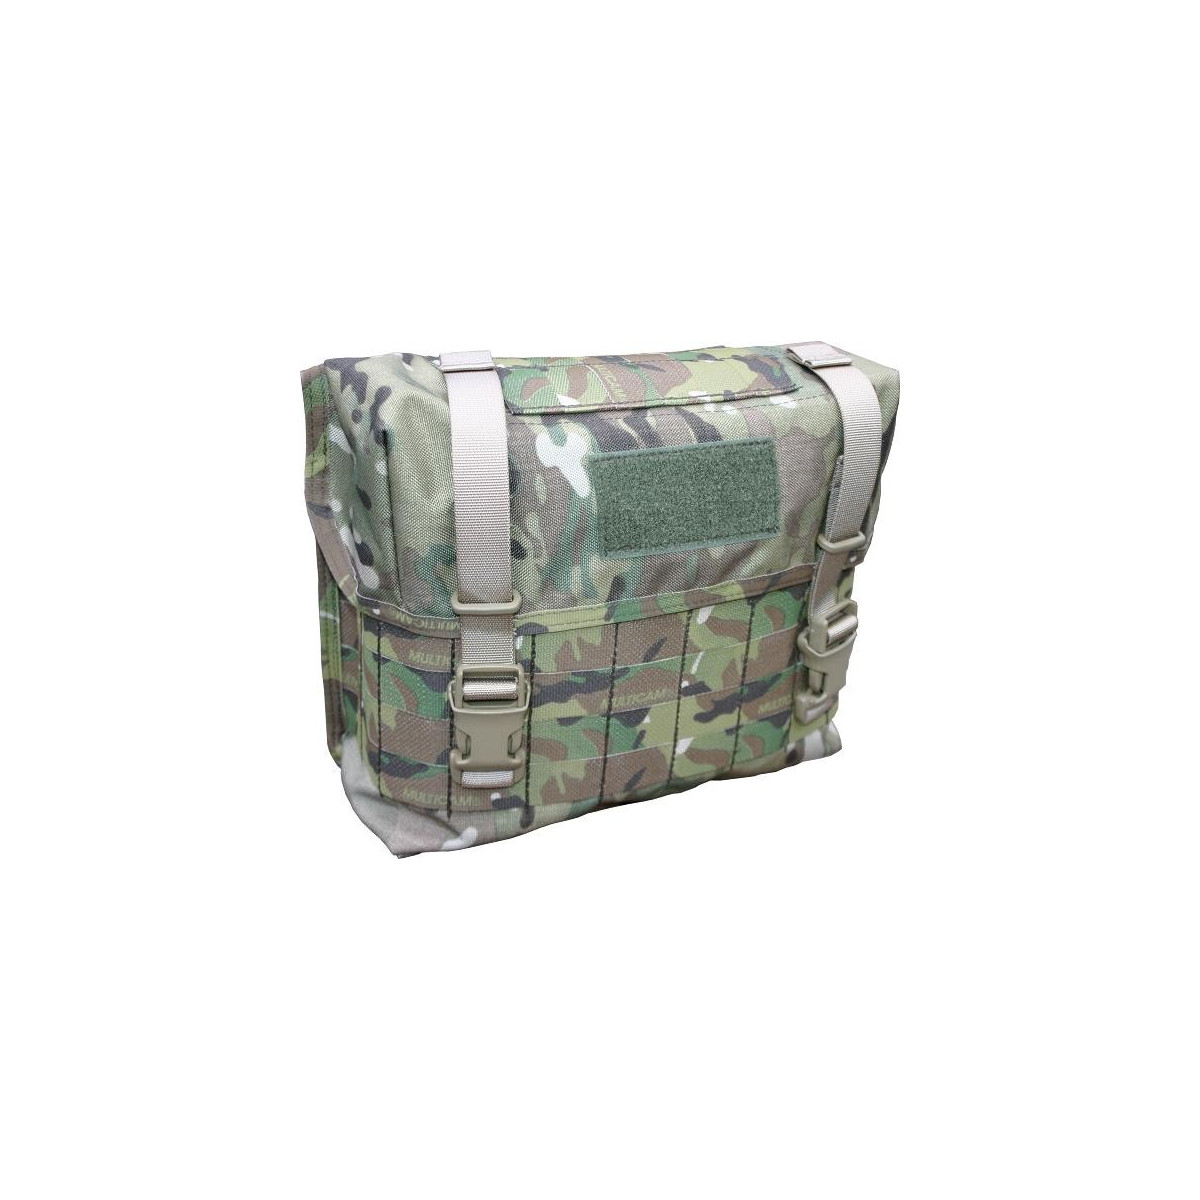 Molle supply bag